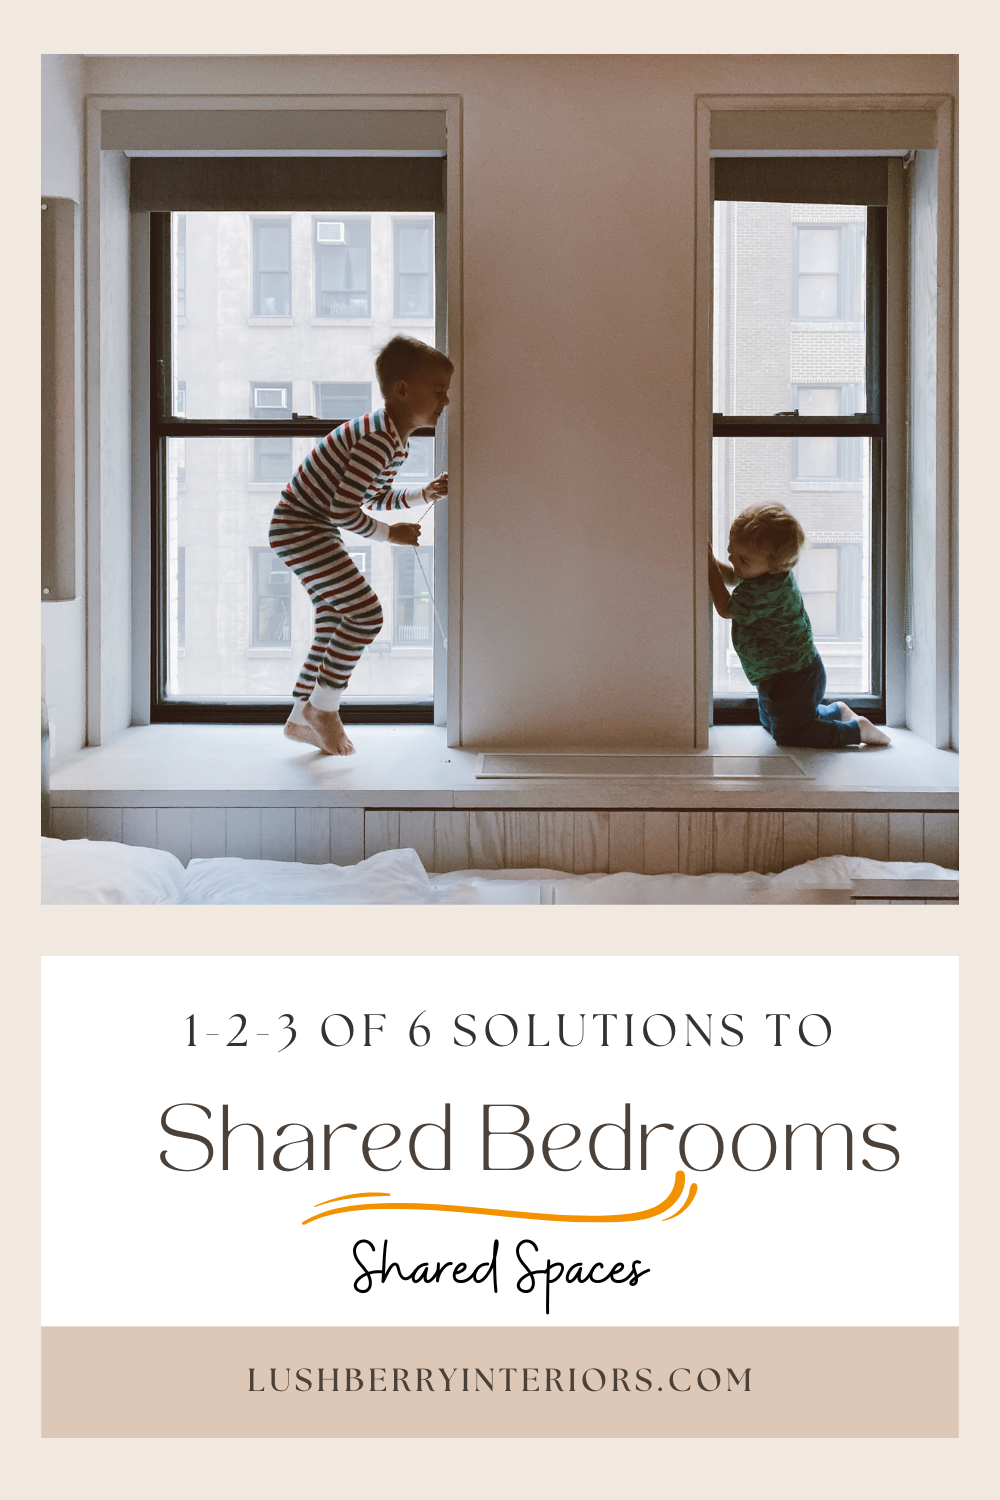 Shared Bedrooms that allow individuality - Steps 1-2-3